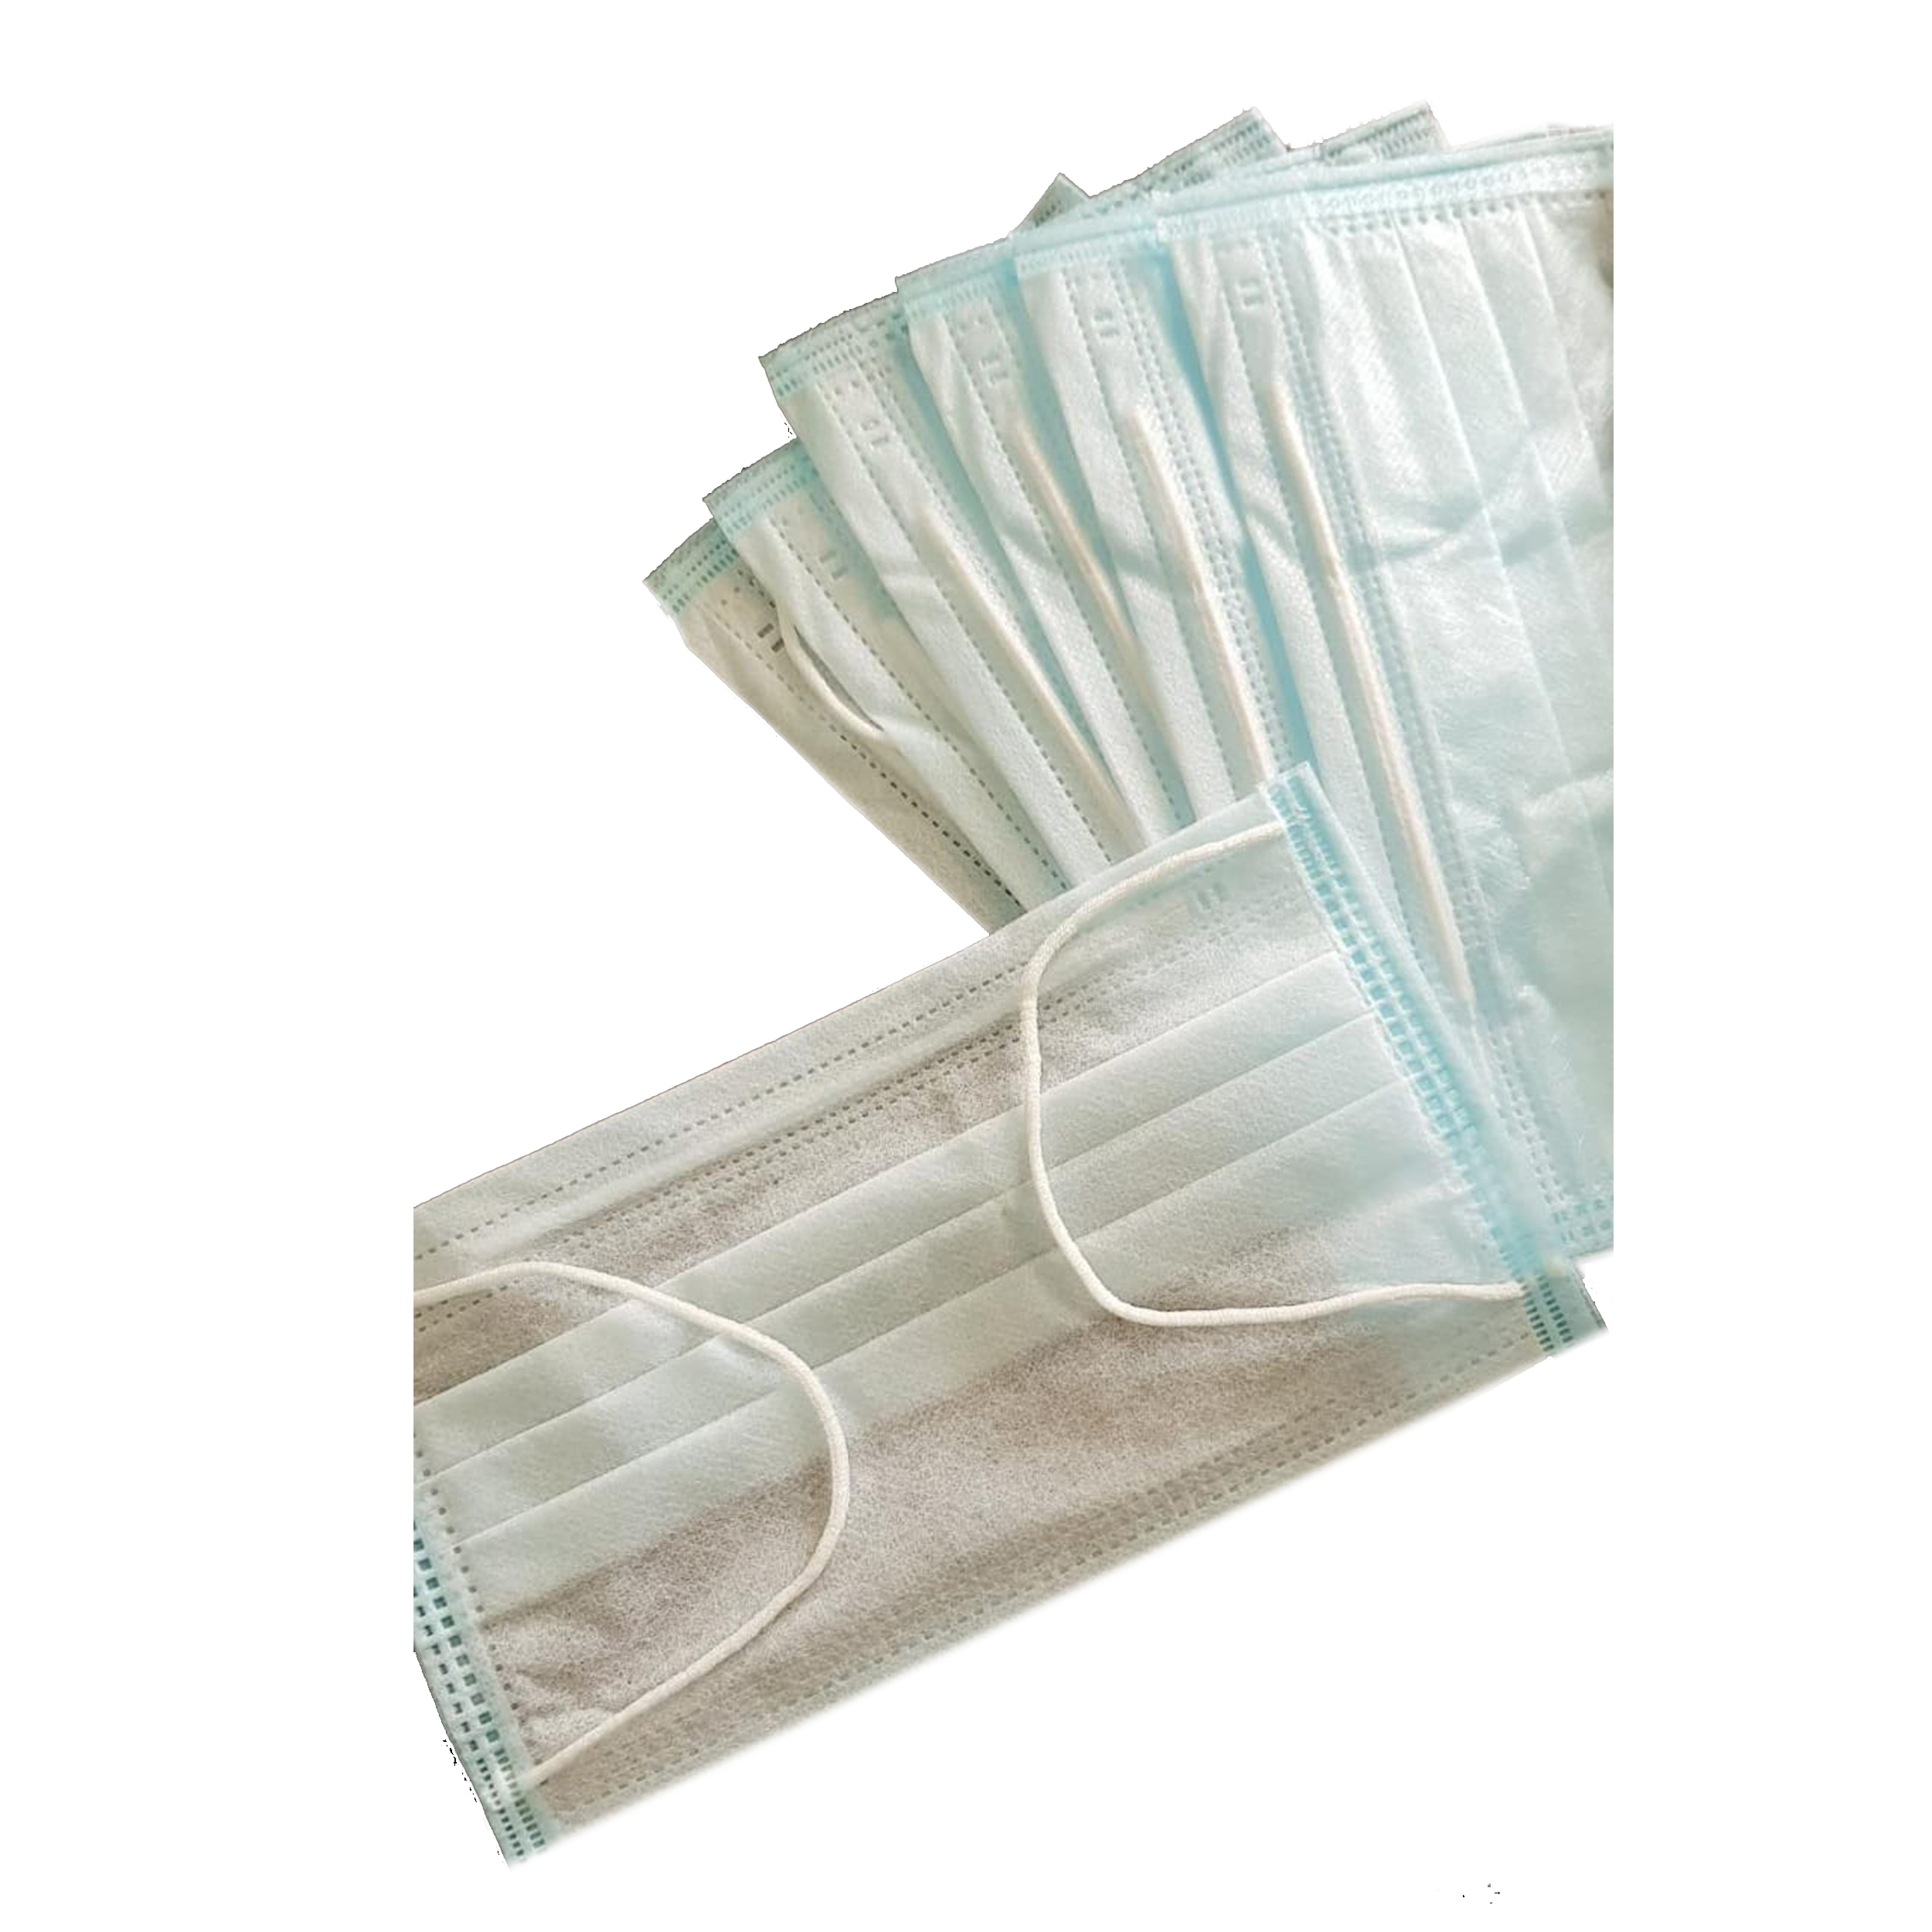 Neelkanth 3 Ply Mask (Pack of 50pcs)